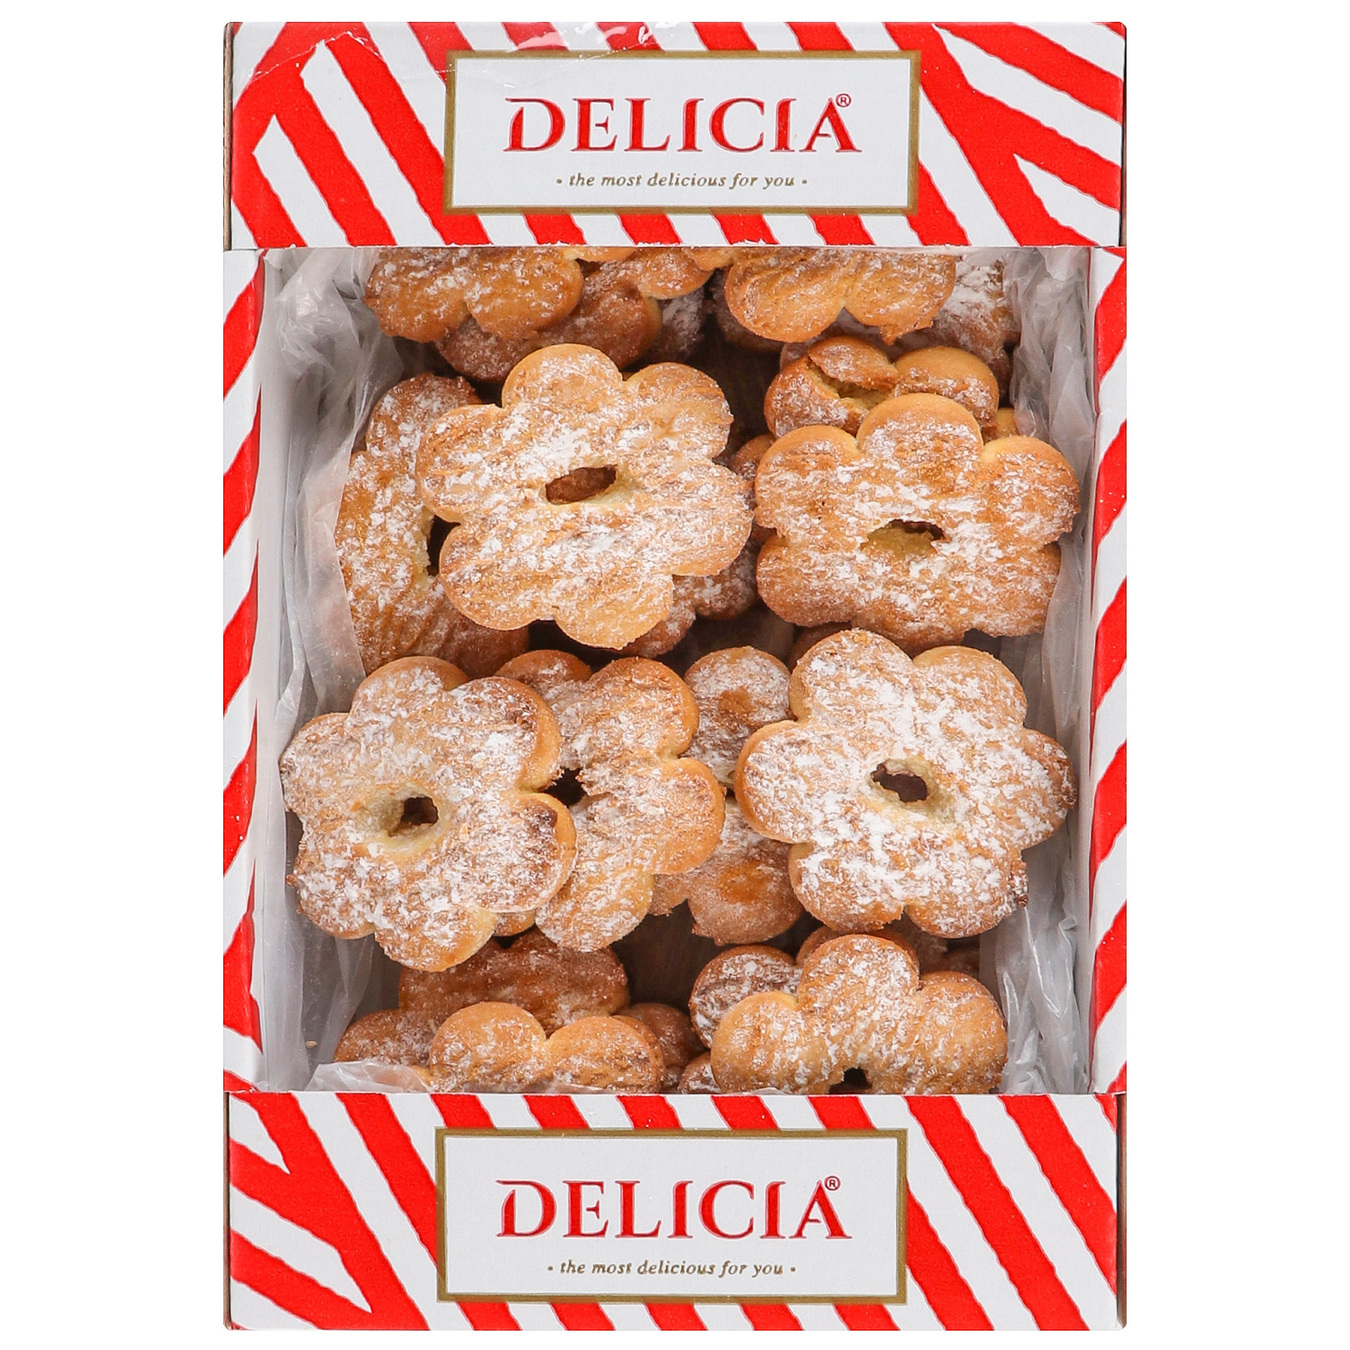 Delicia homemade butter cookies with powdered sugar 250g